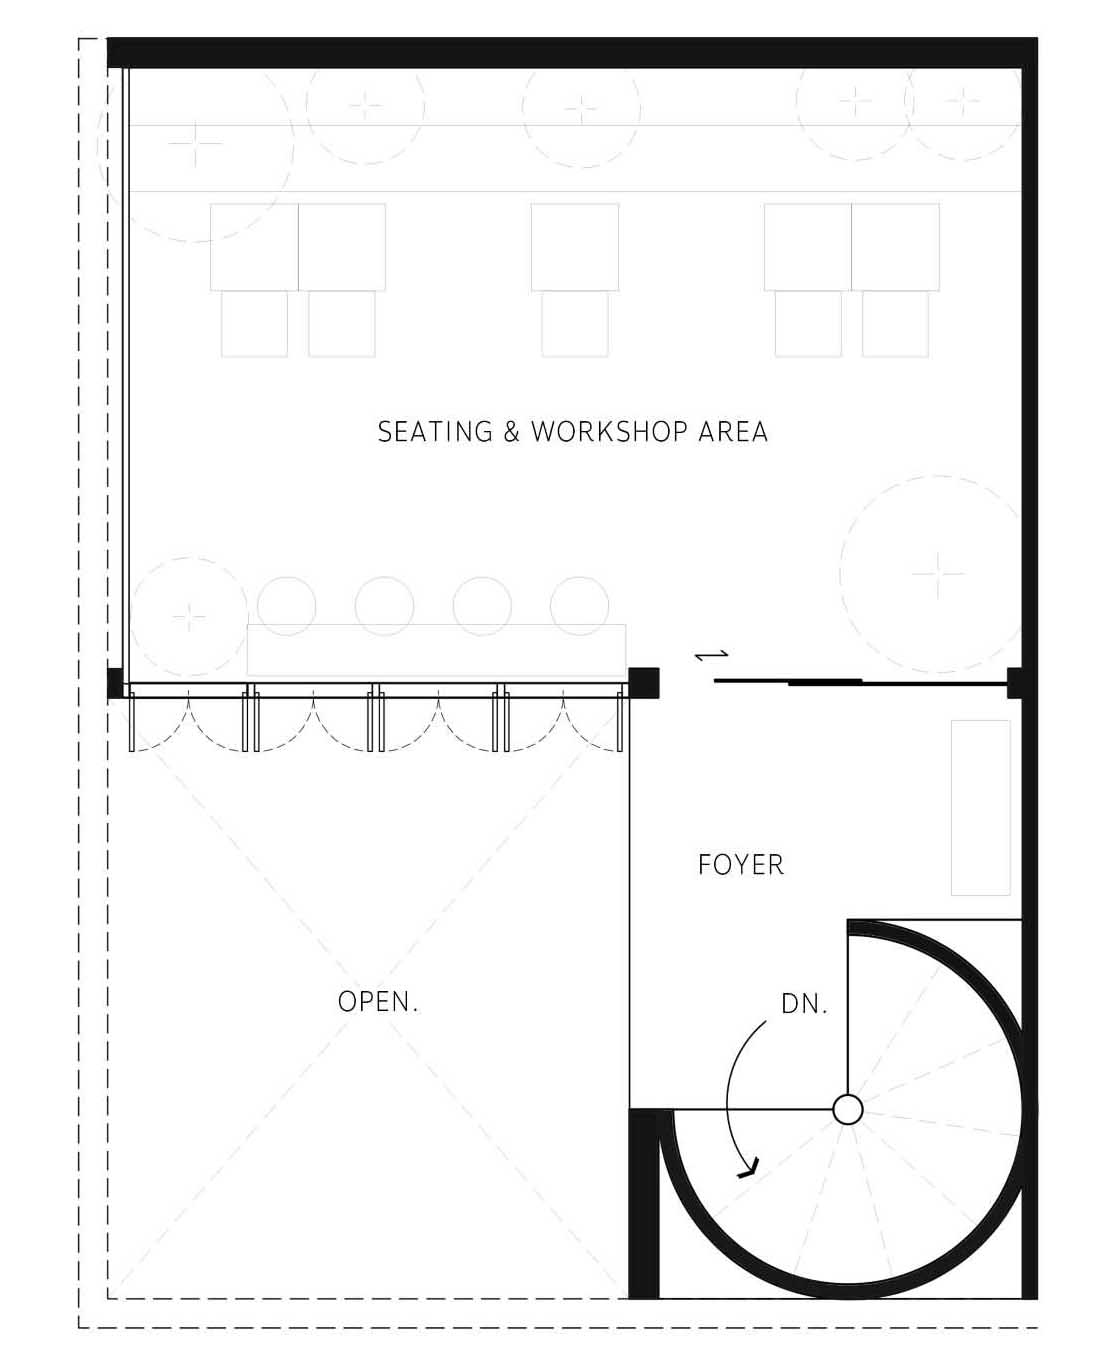 The floor plan of a two-storey cafe.